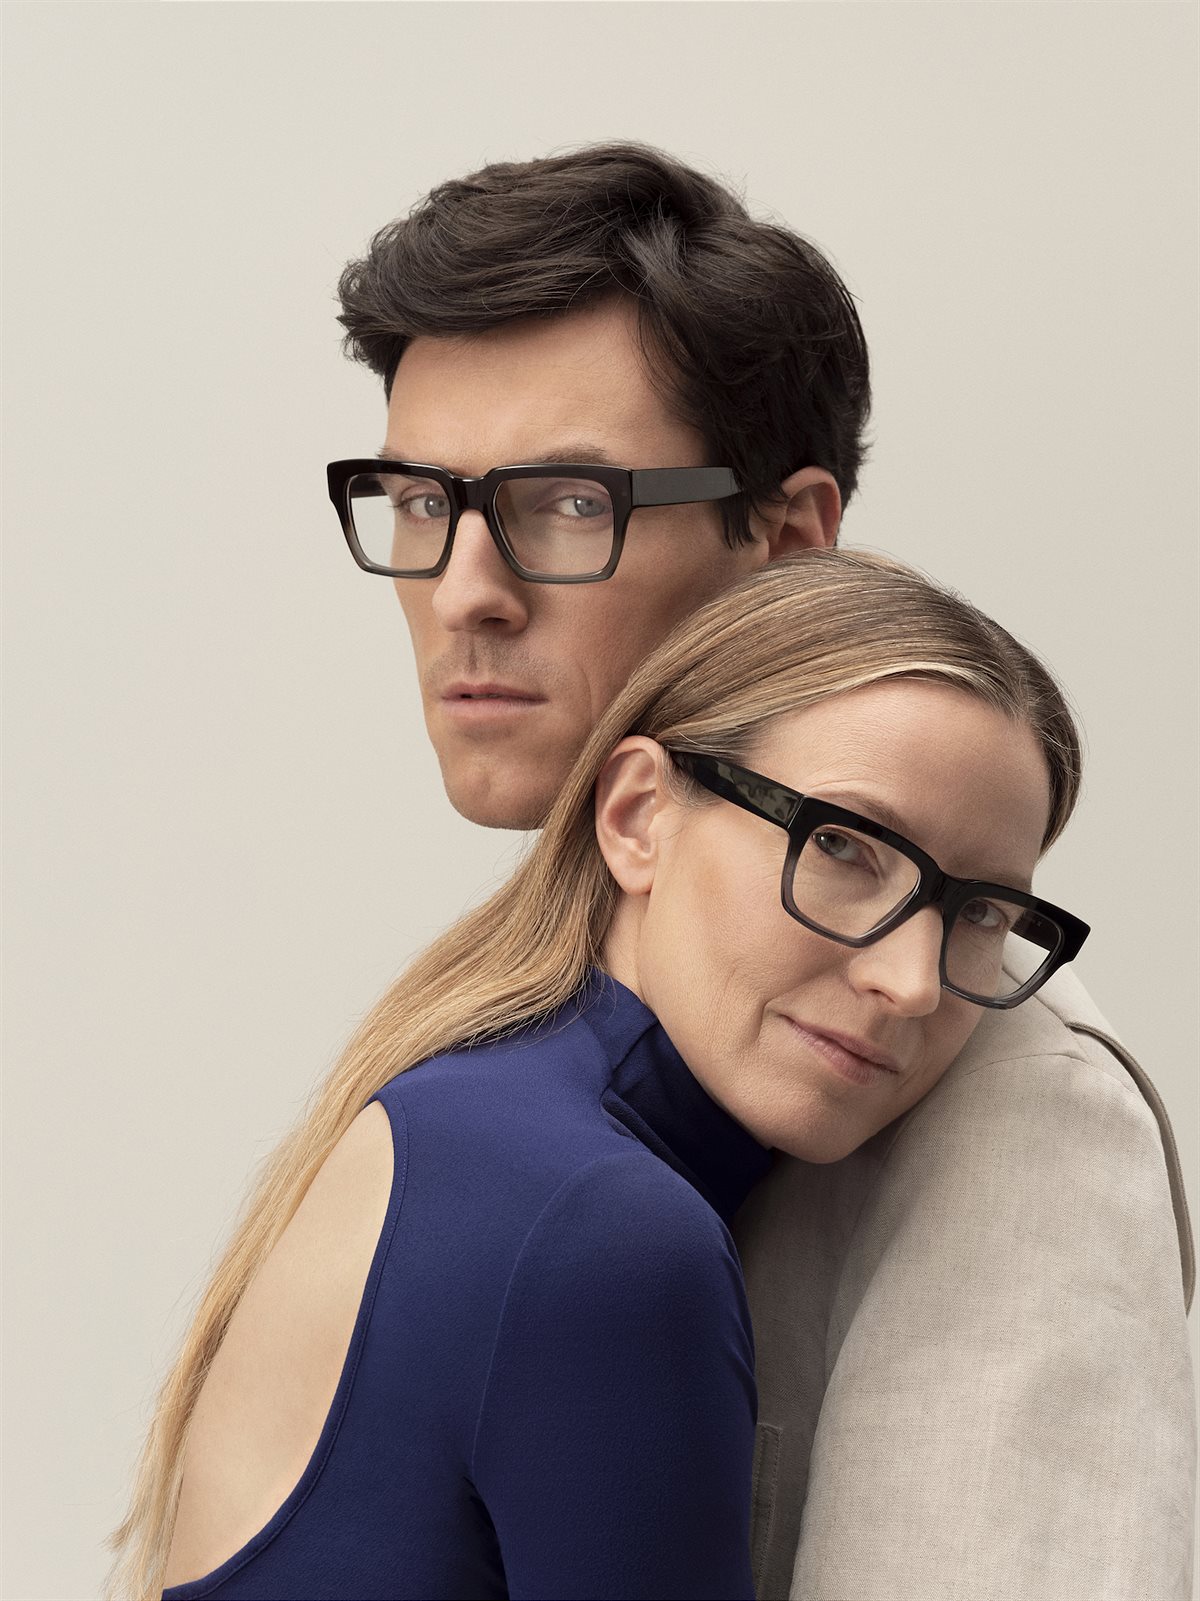 ANDY WOLF Eyewear_Rediscover 2021 Collection_4598_05_4599_06_© Bastian Thiery